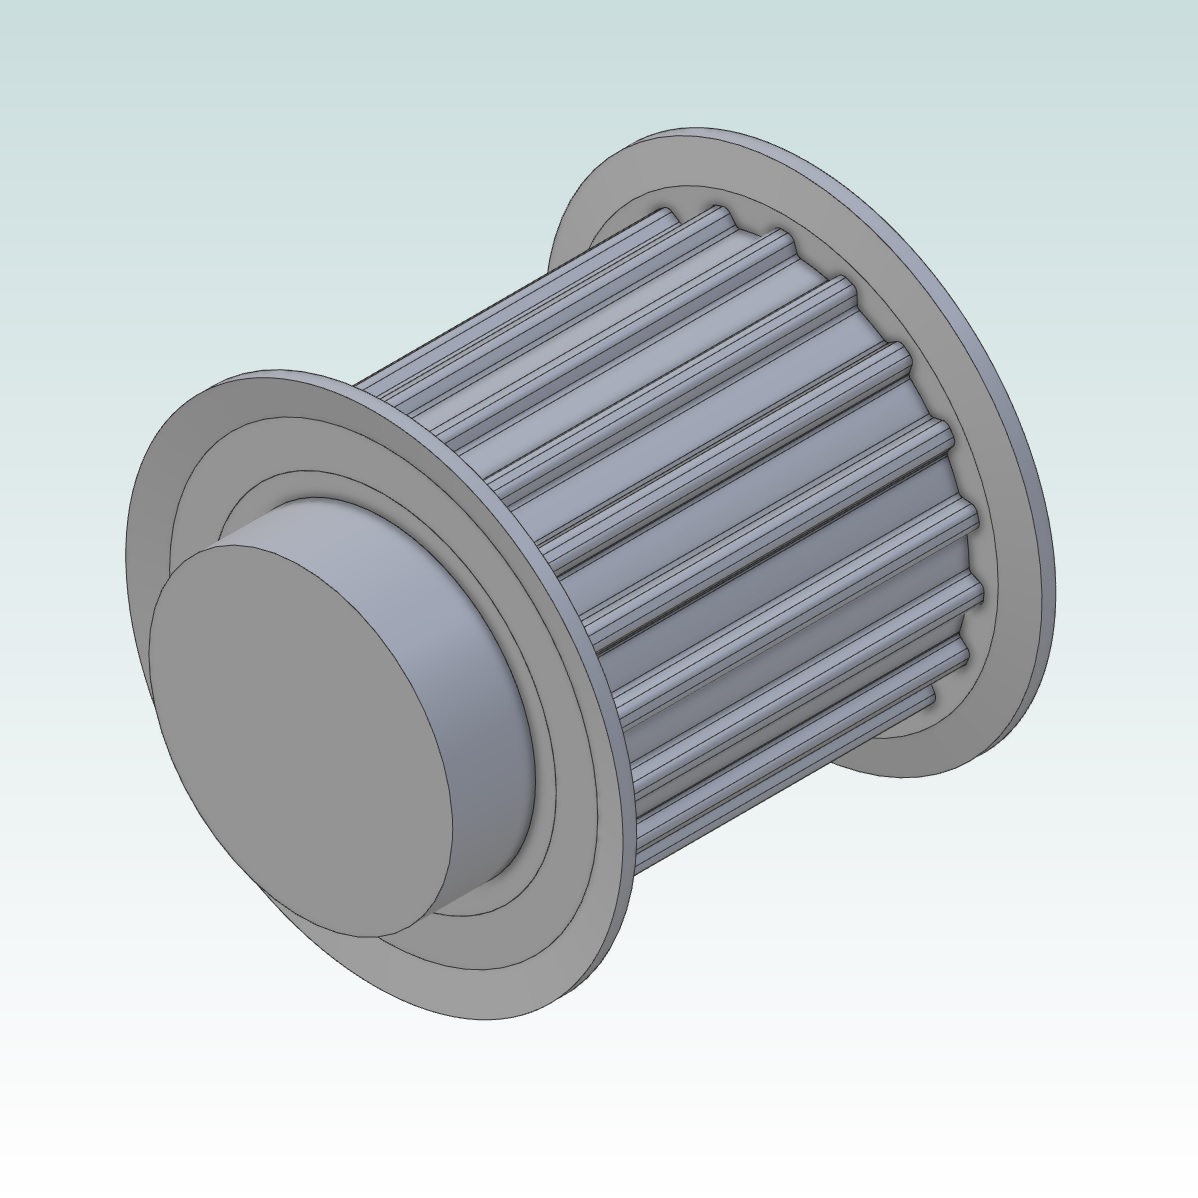 64121 at5 pulley 36at5 z19 for 25mm wide belts 3d render